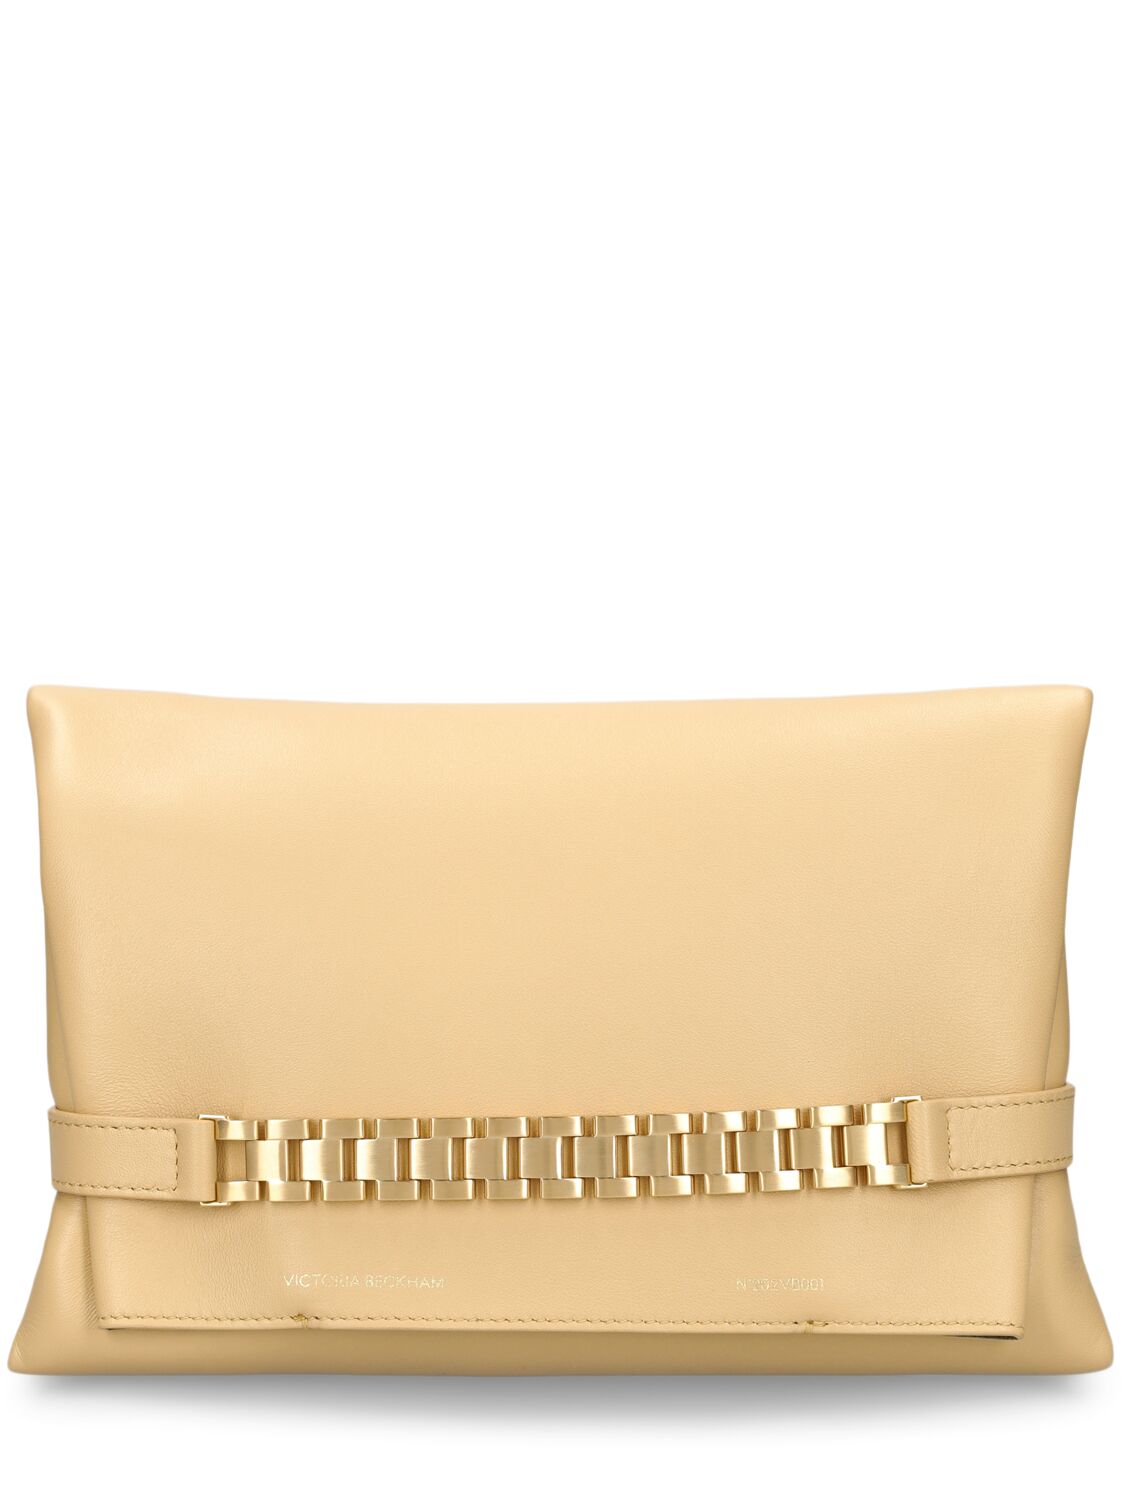 Victoria Beckham Chain Leather Pouch In Sesame